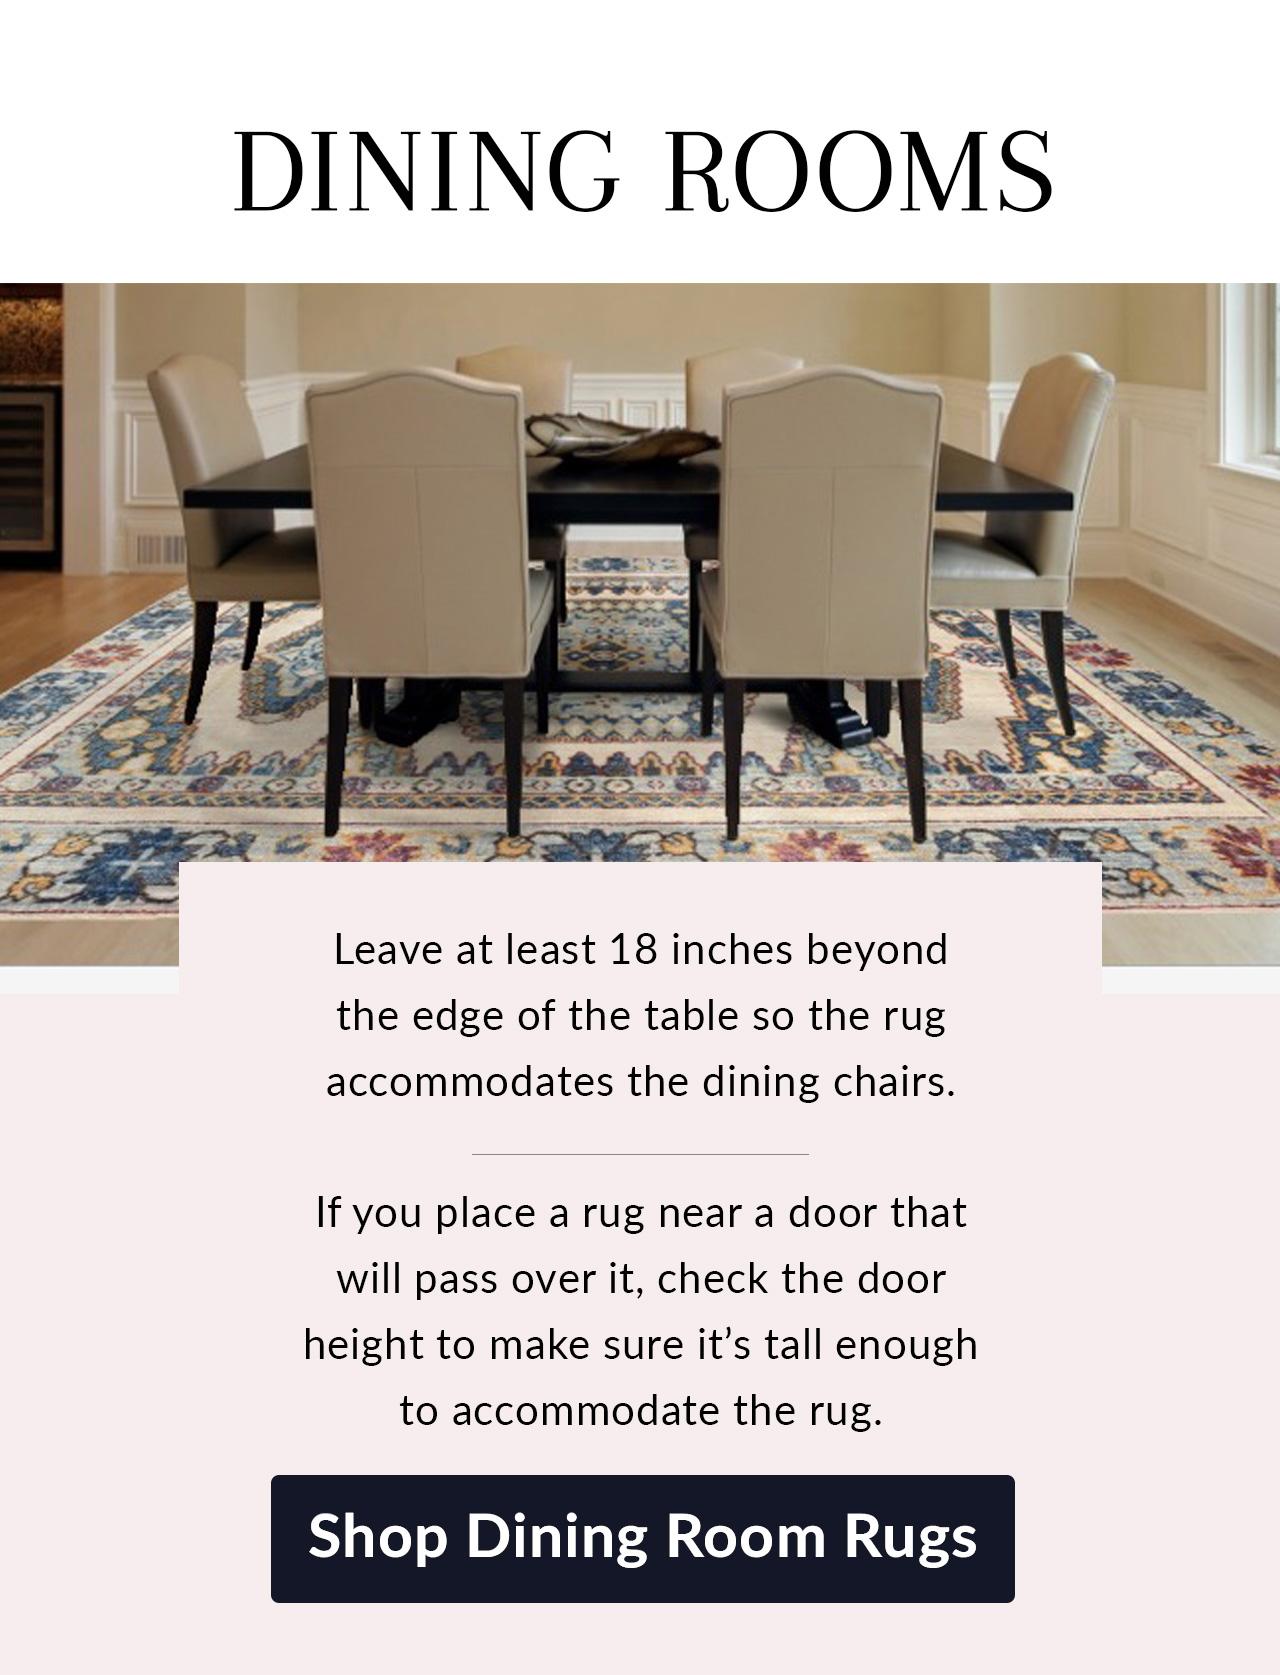 Dining Rooms; 10% Off - Limited Time Only